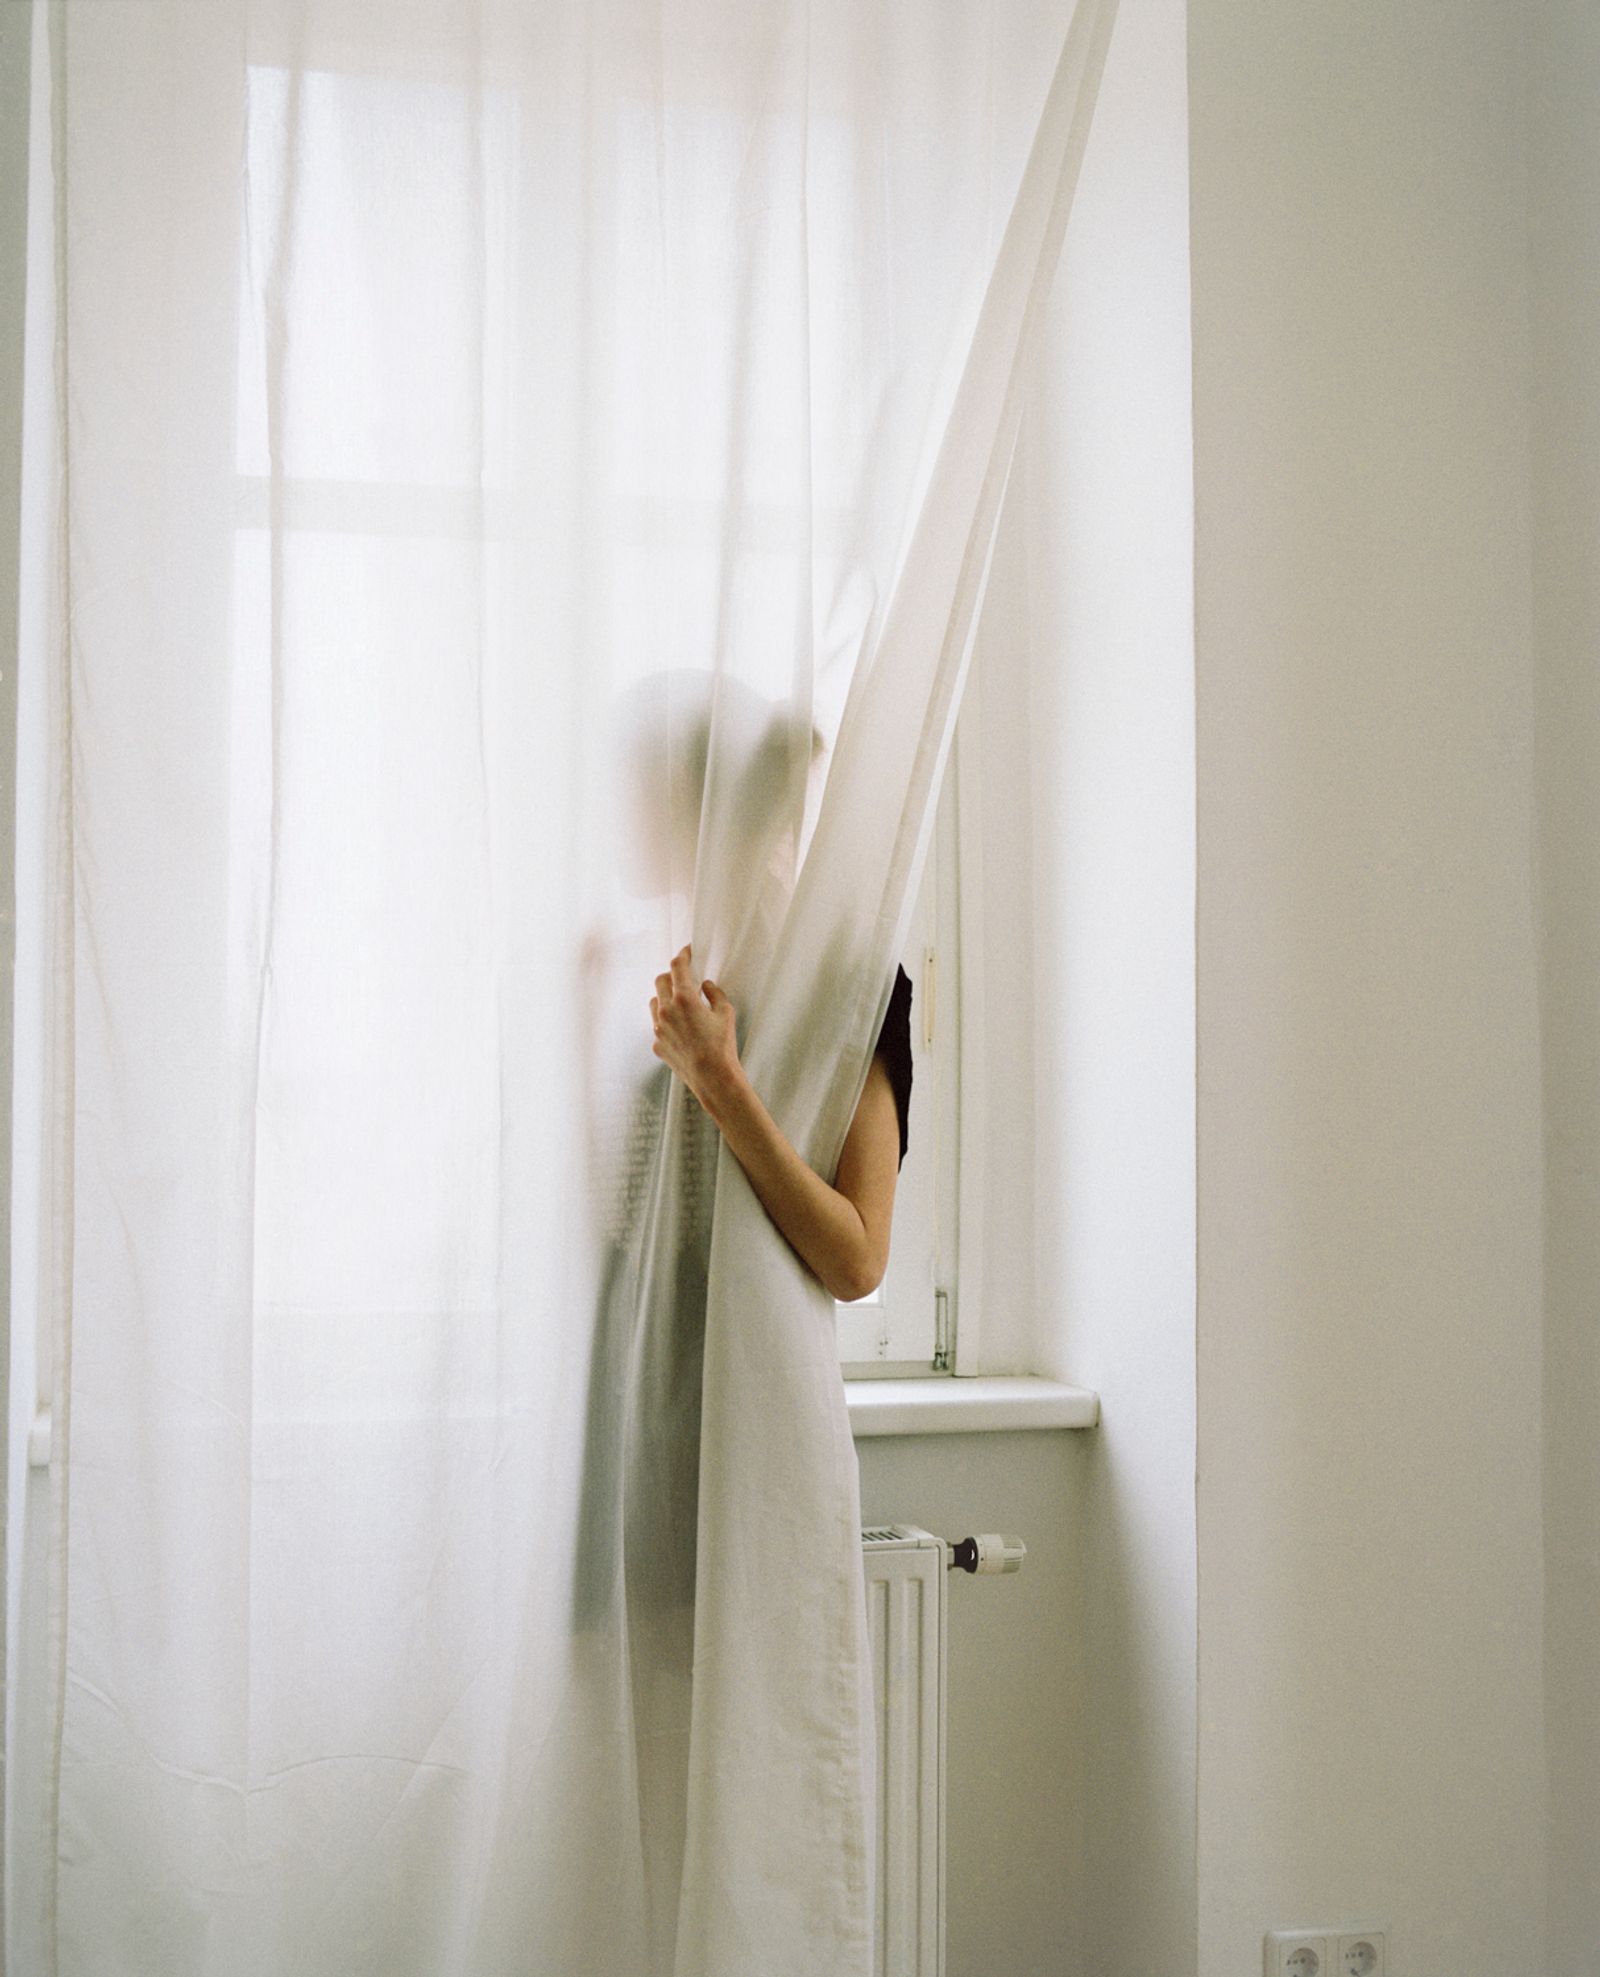 © Mafalda Rakoš - Image from the I want to disappear - approaching eating disorders photography project